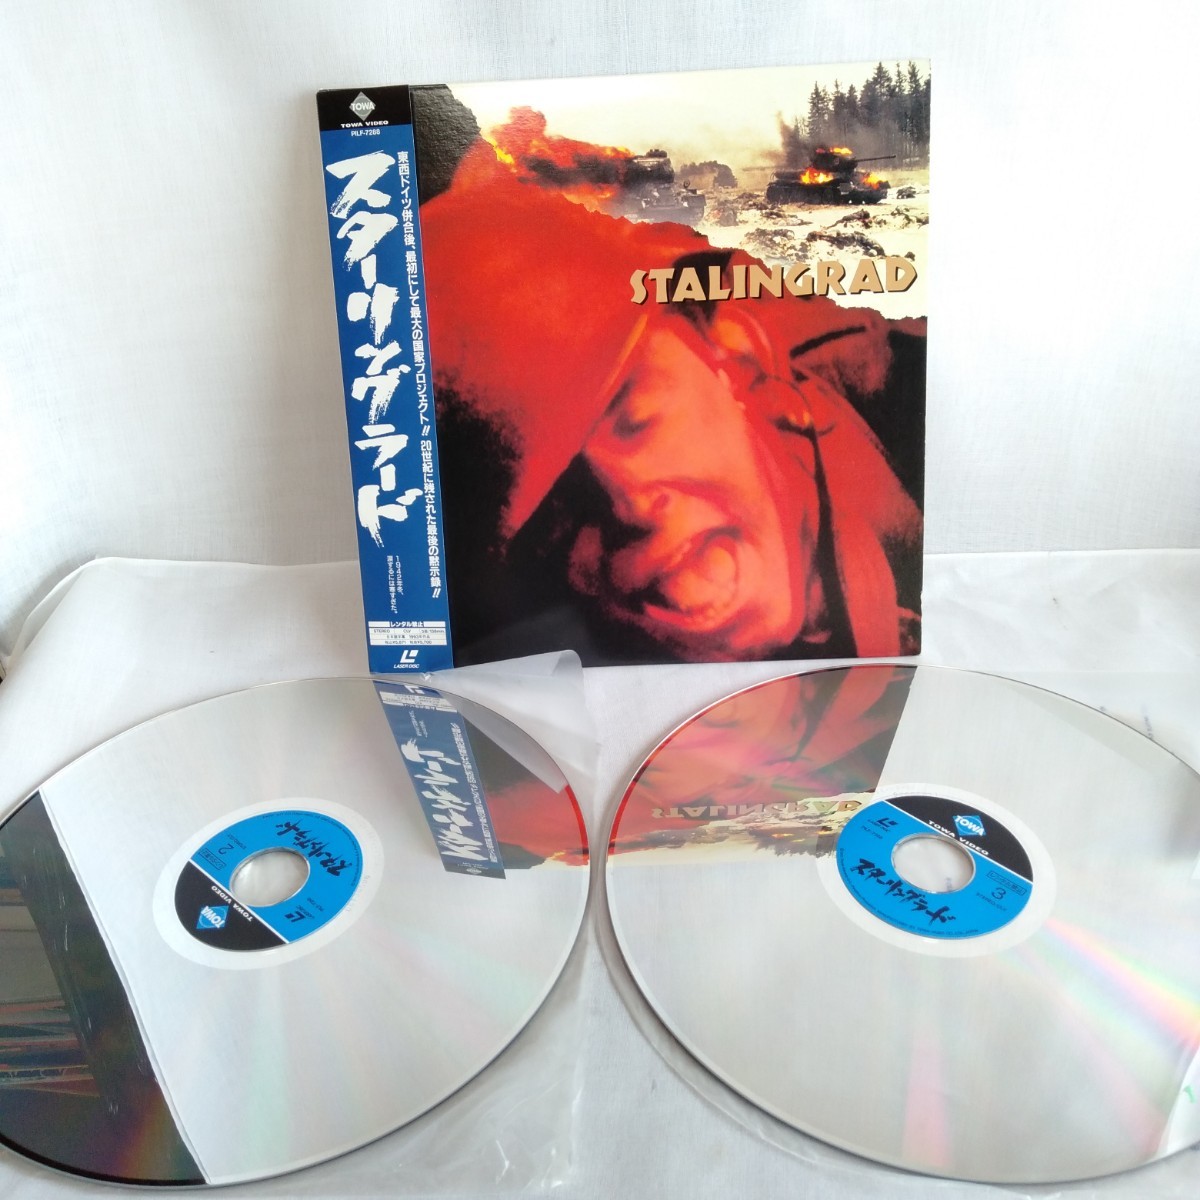 ta541 sterling la-doSTALINGRAD Japanese title yozef* Phil sma year laser disk LD what sheets also uniform carriage 1,000 jpy reproduction not yet verification 